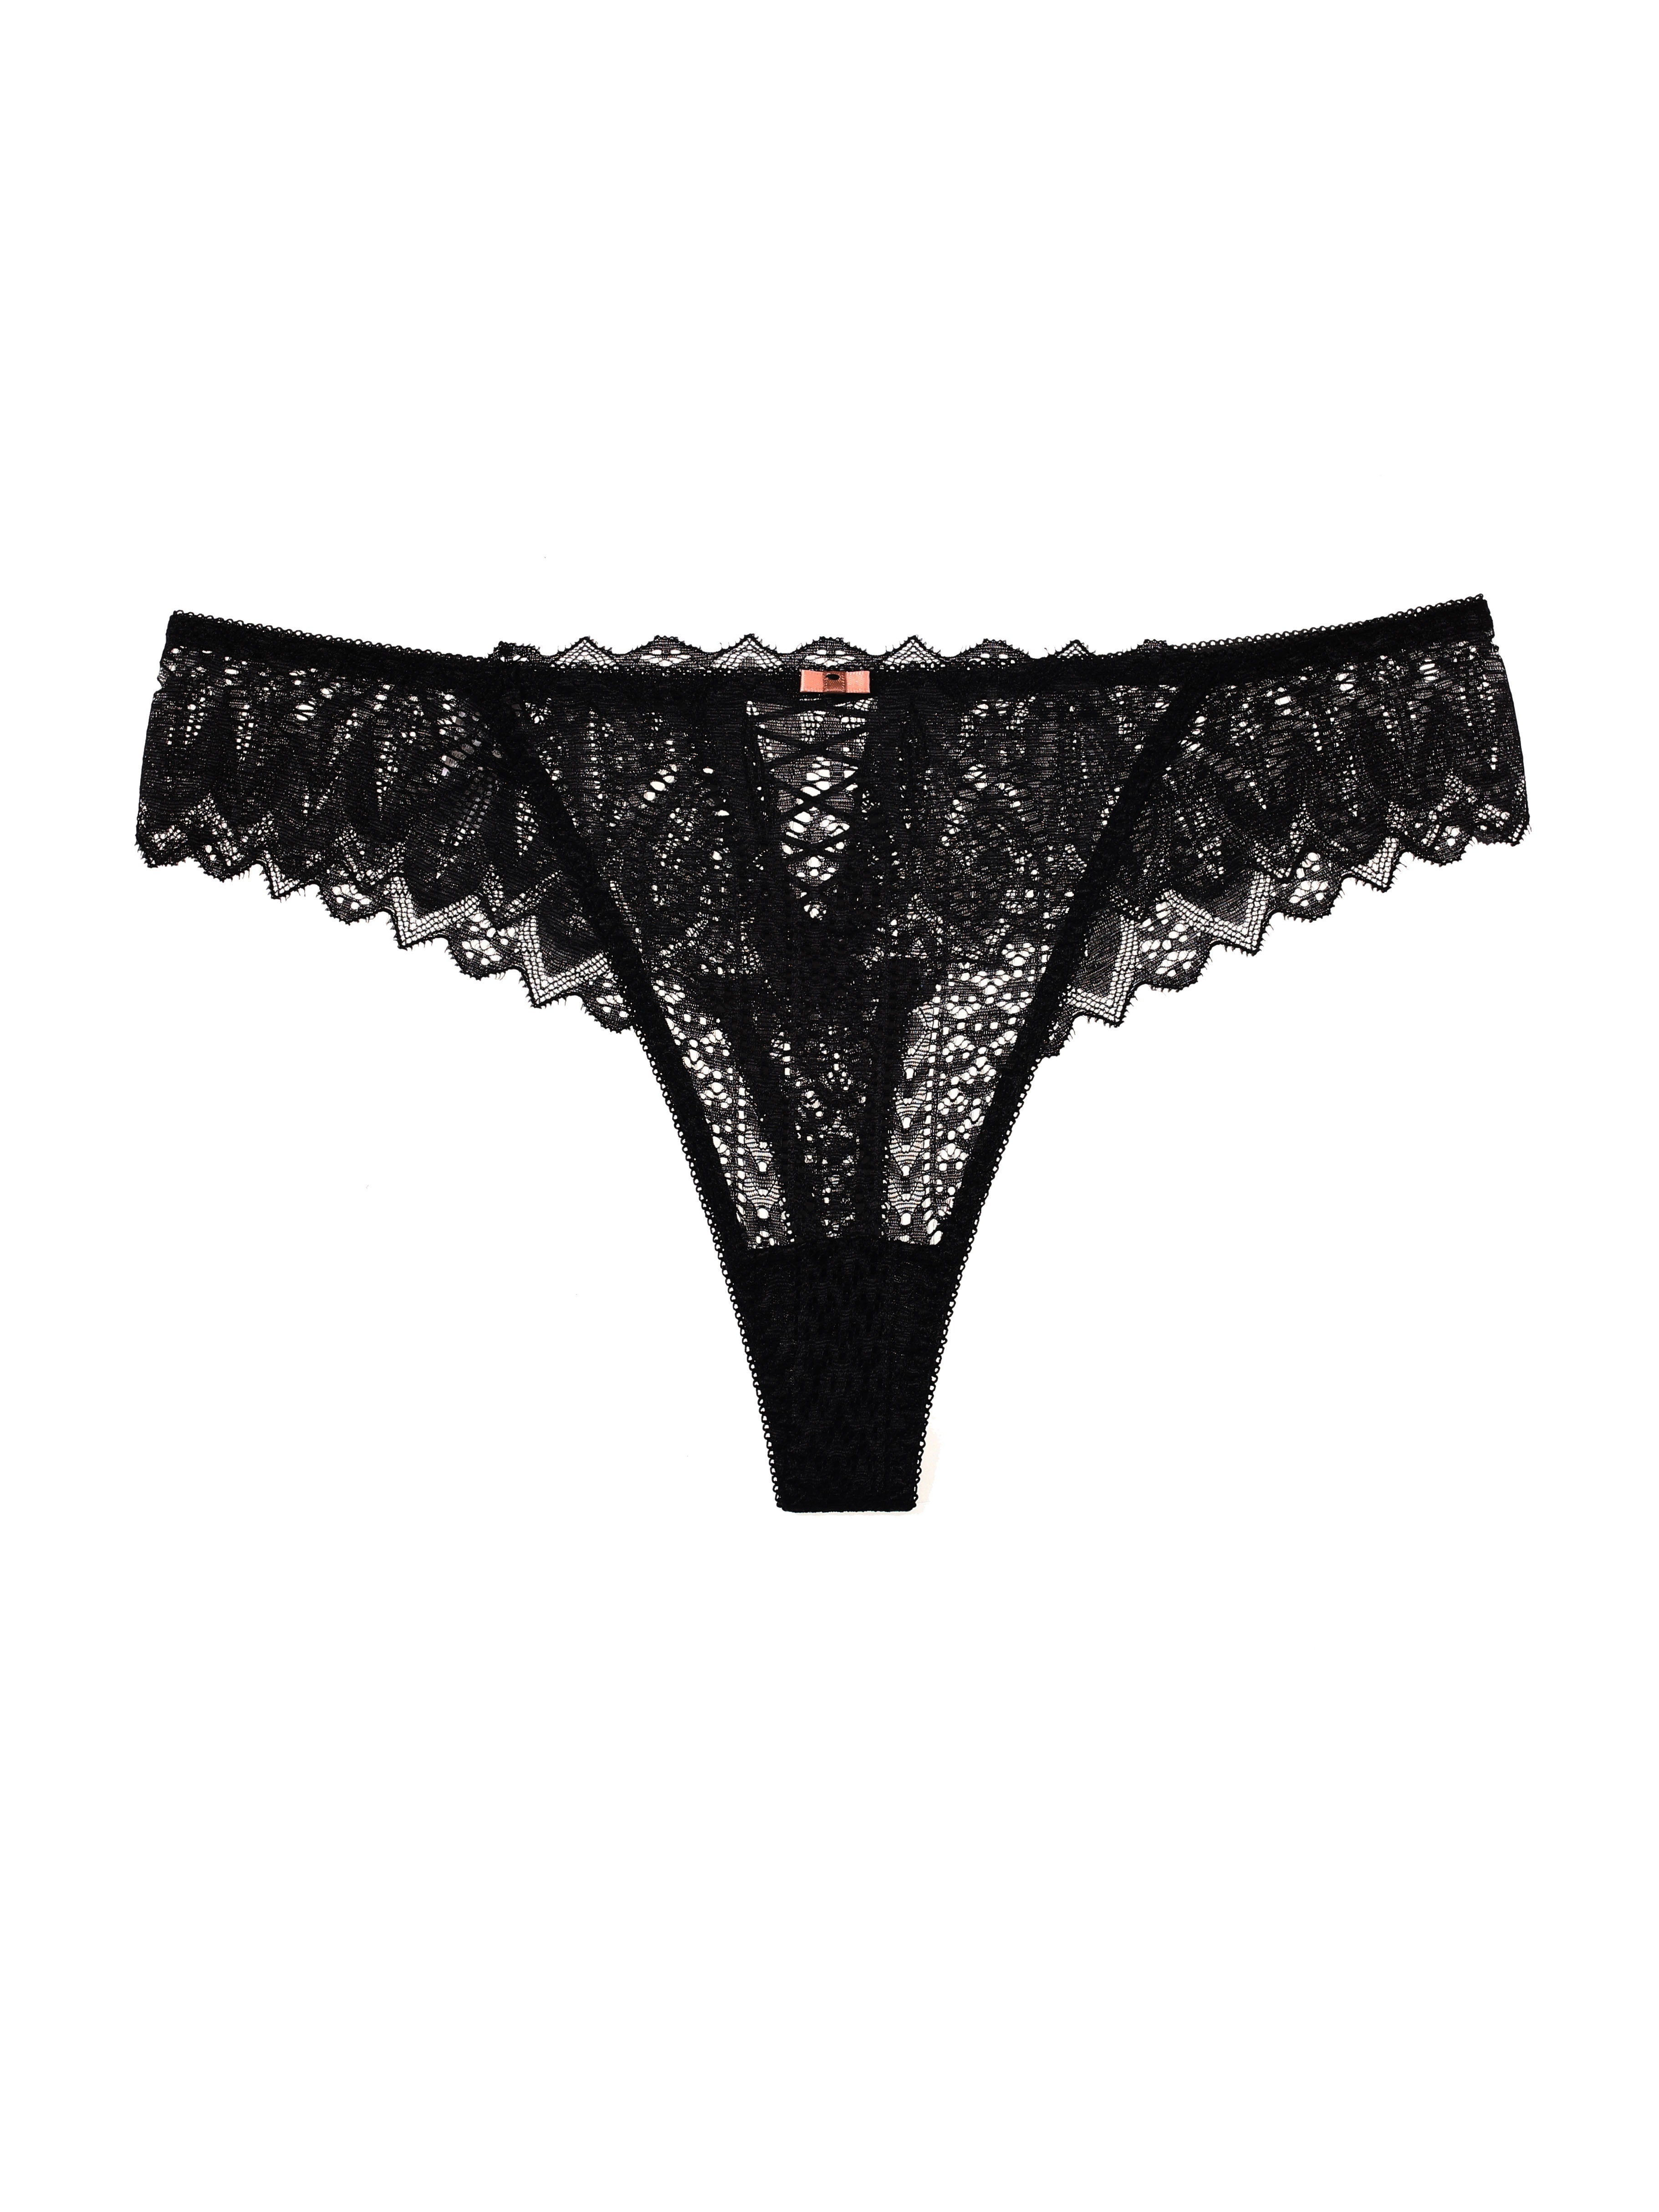 Women Sexy Lace Lingerie See-through G-string Briefs Thongs Underwe